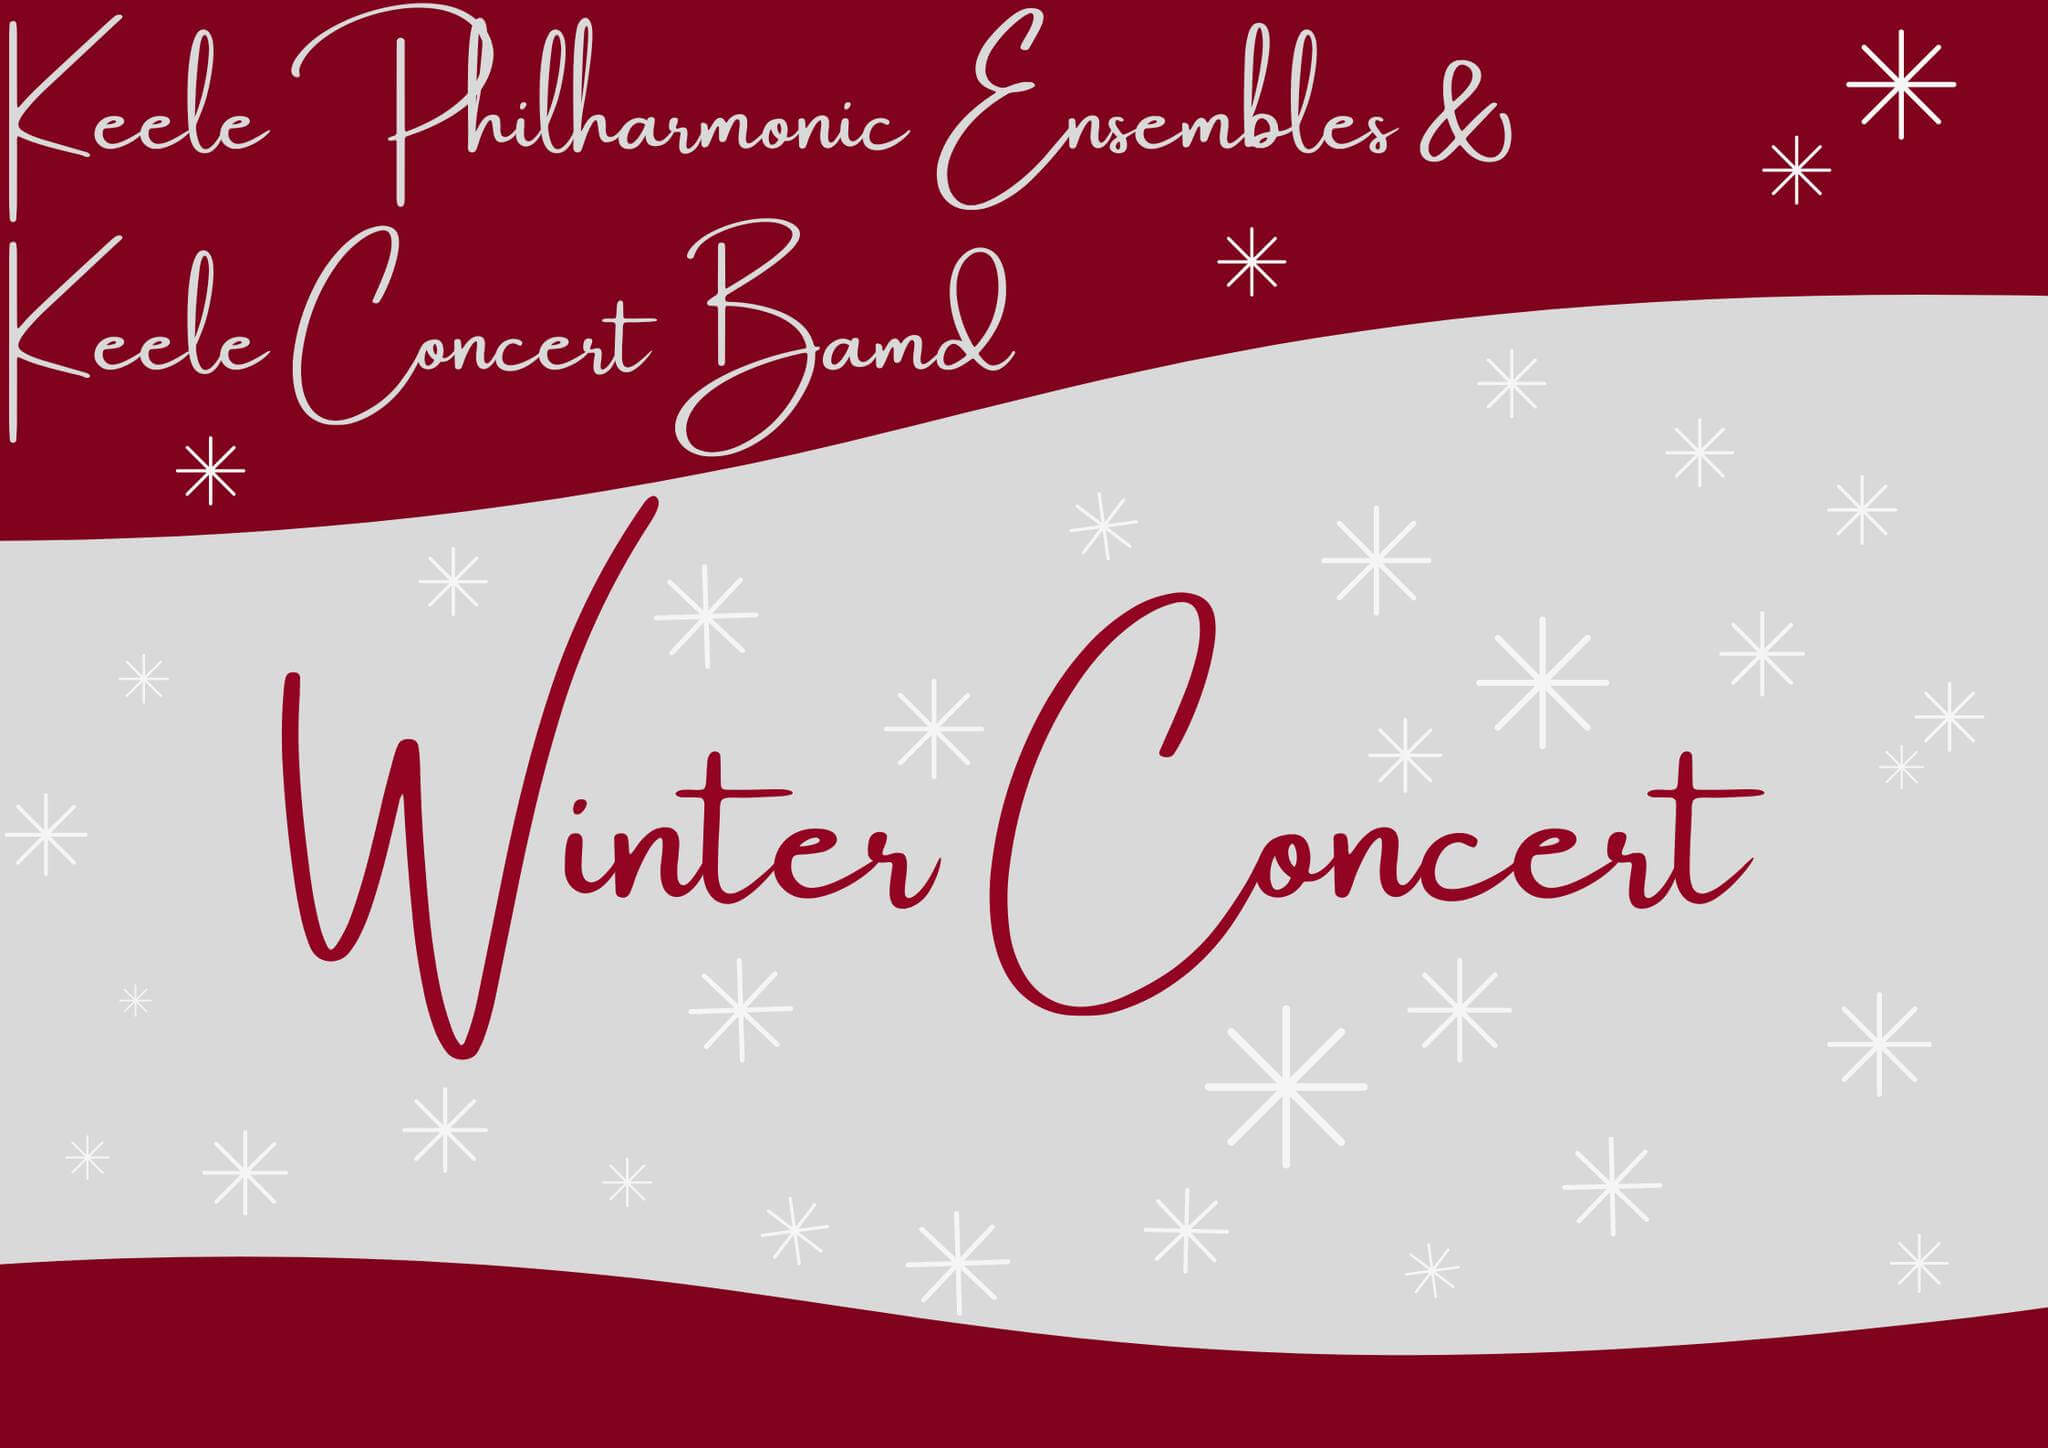 image of red and white festive poster featuring the title of the concert with snowflakes falling